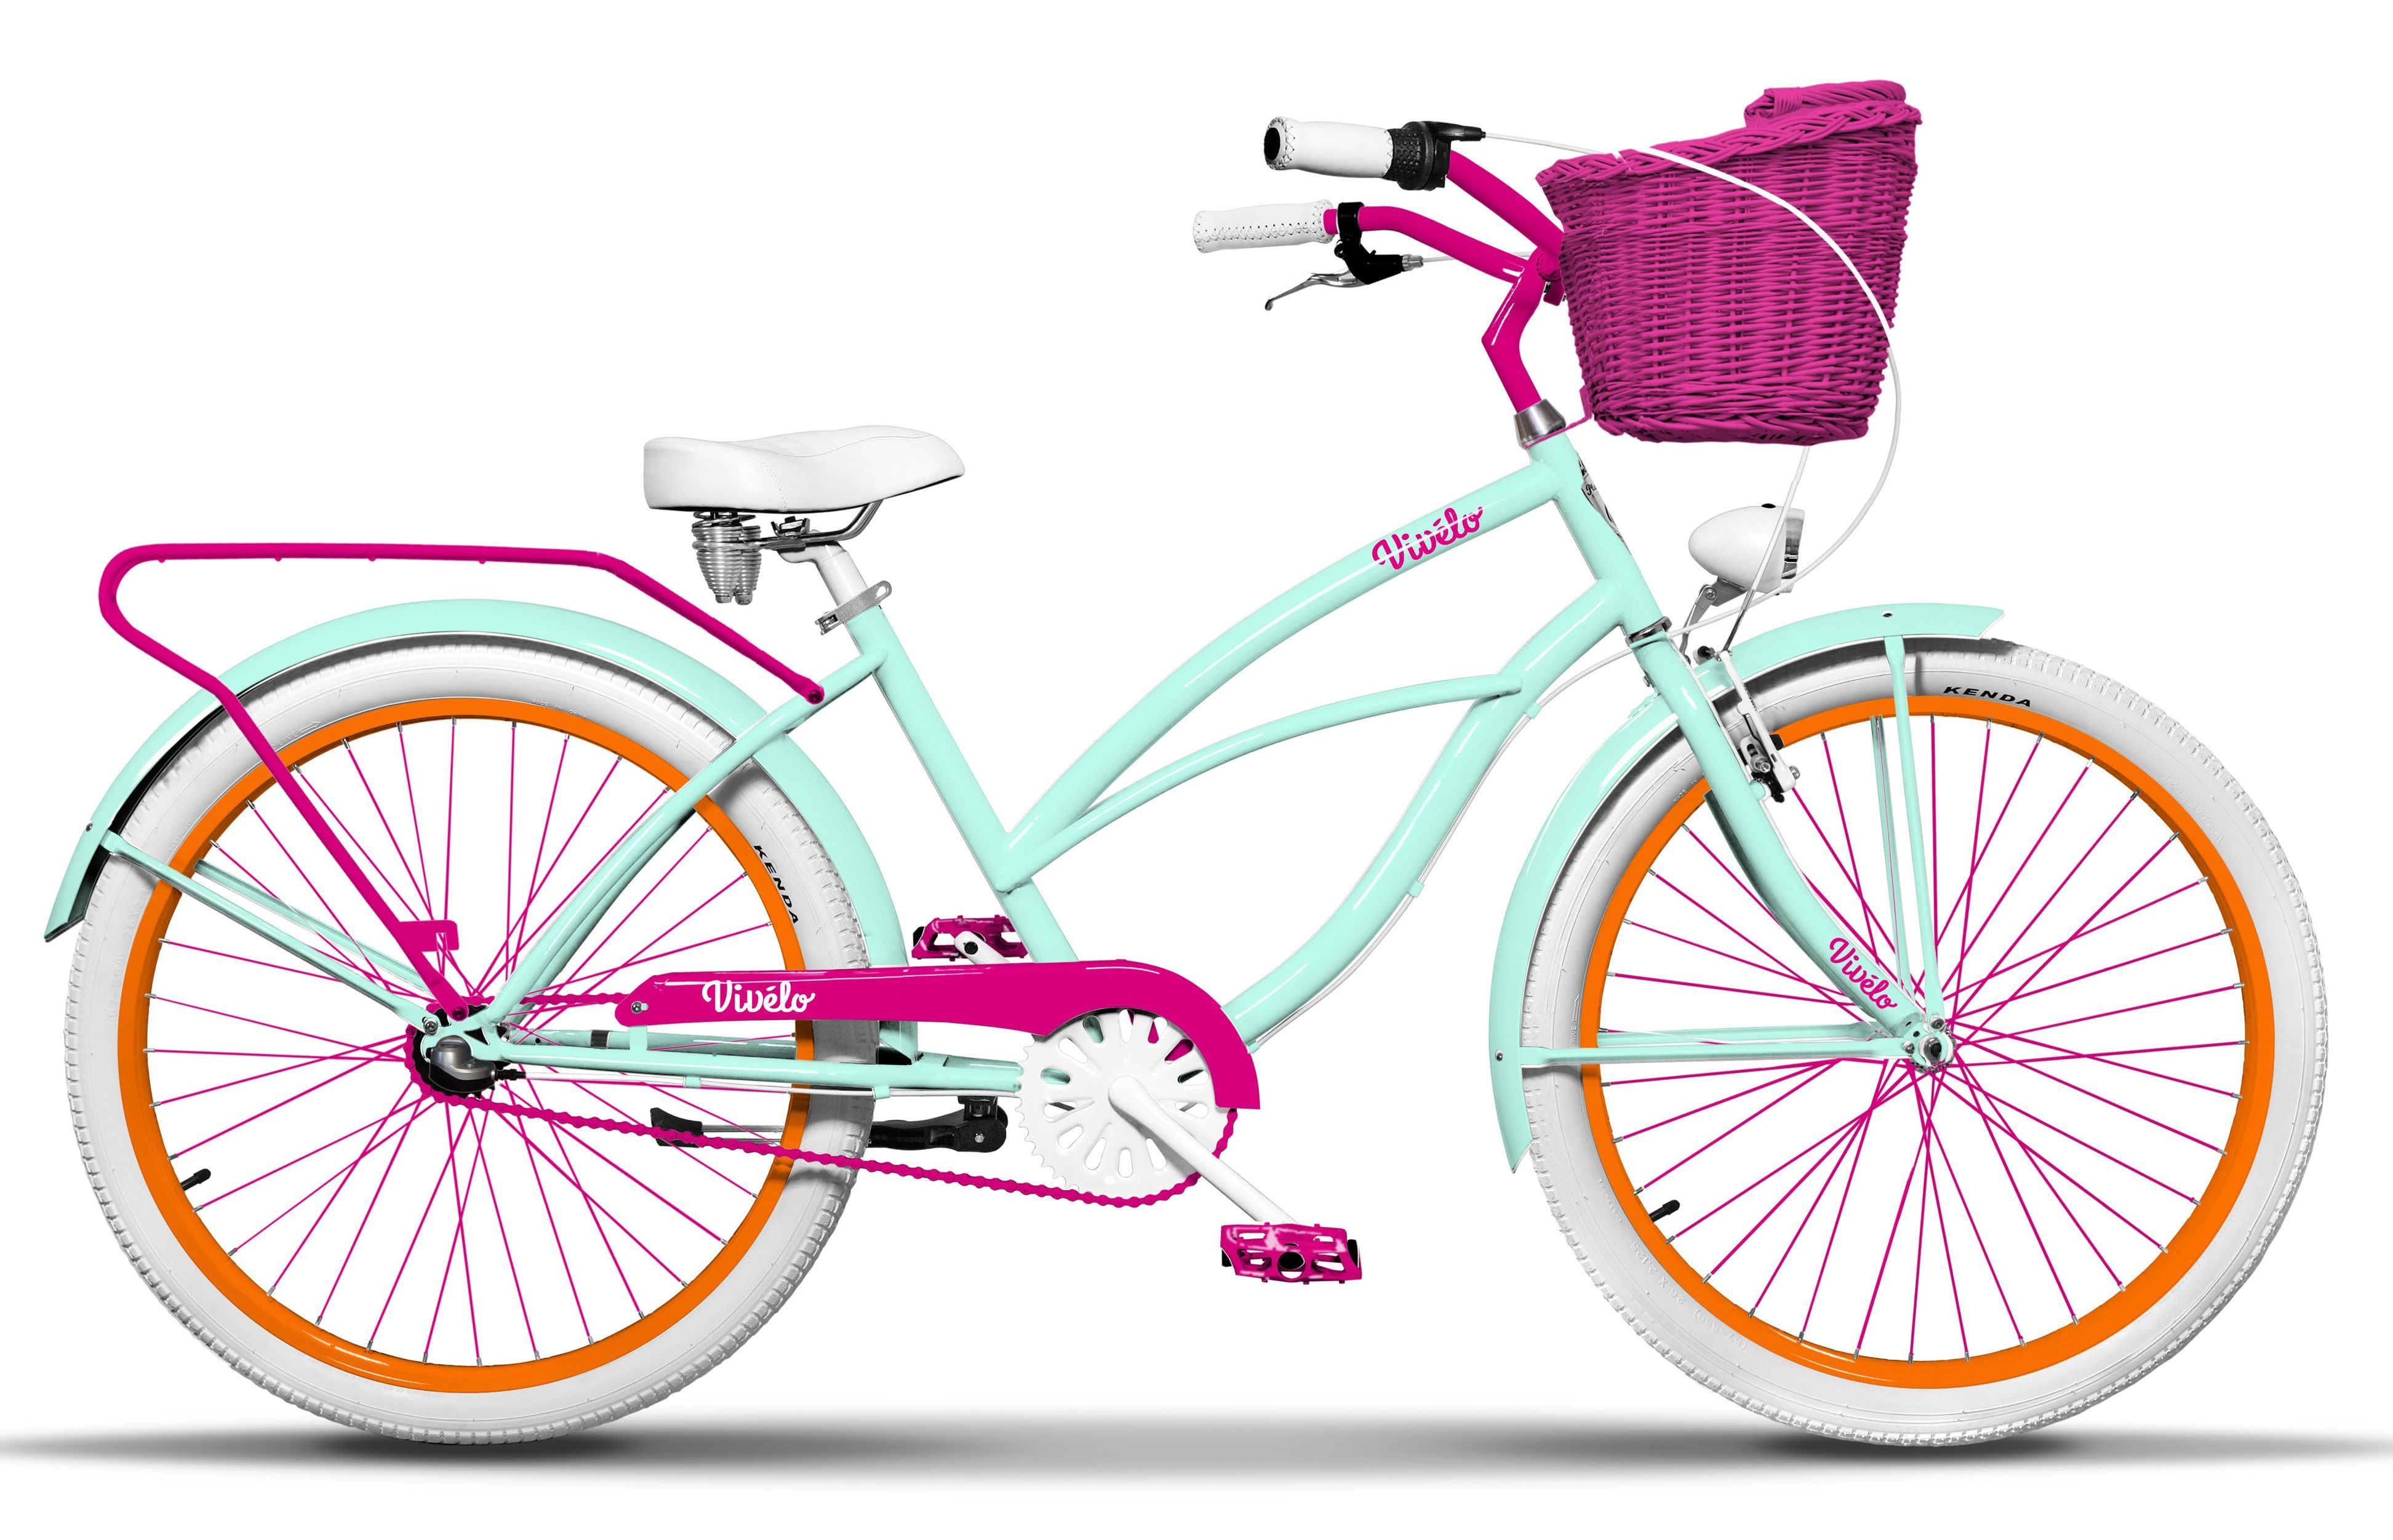 Could This 24 Inch Purple Bike Be Your Perfect Cruiser. 8 Reasons the Huffy Beach Cruiser in Purple Wins Riders Over